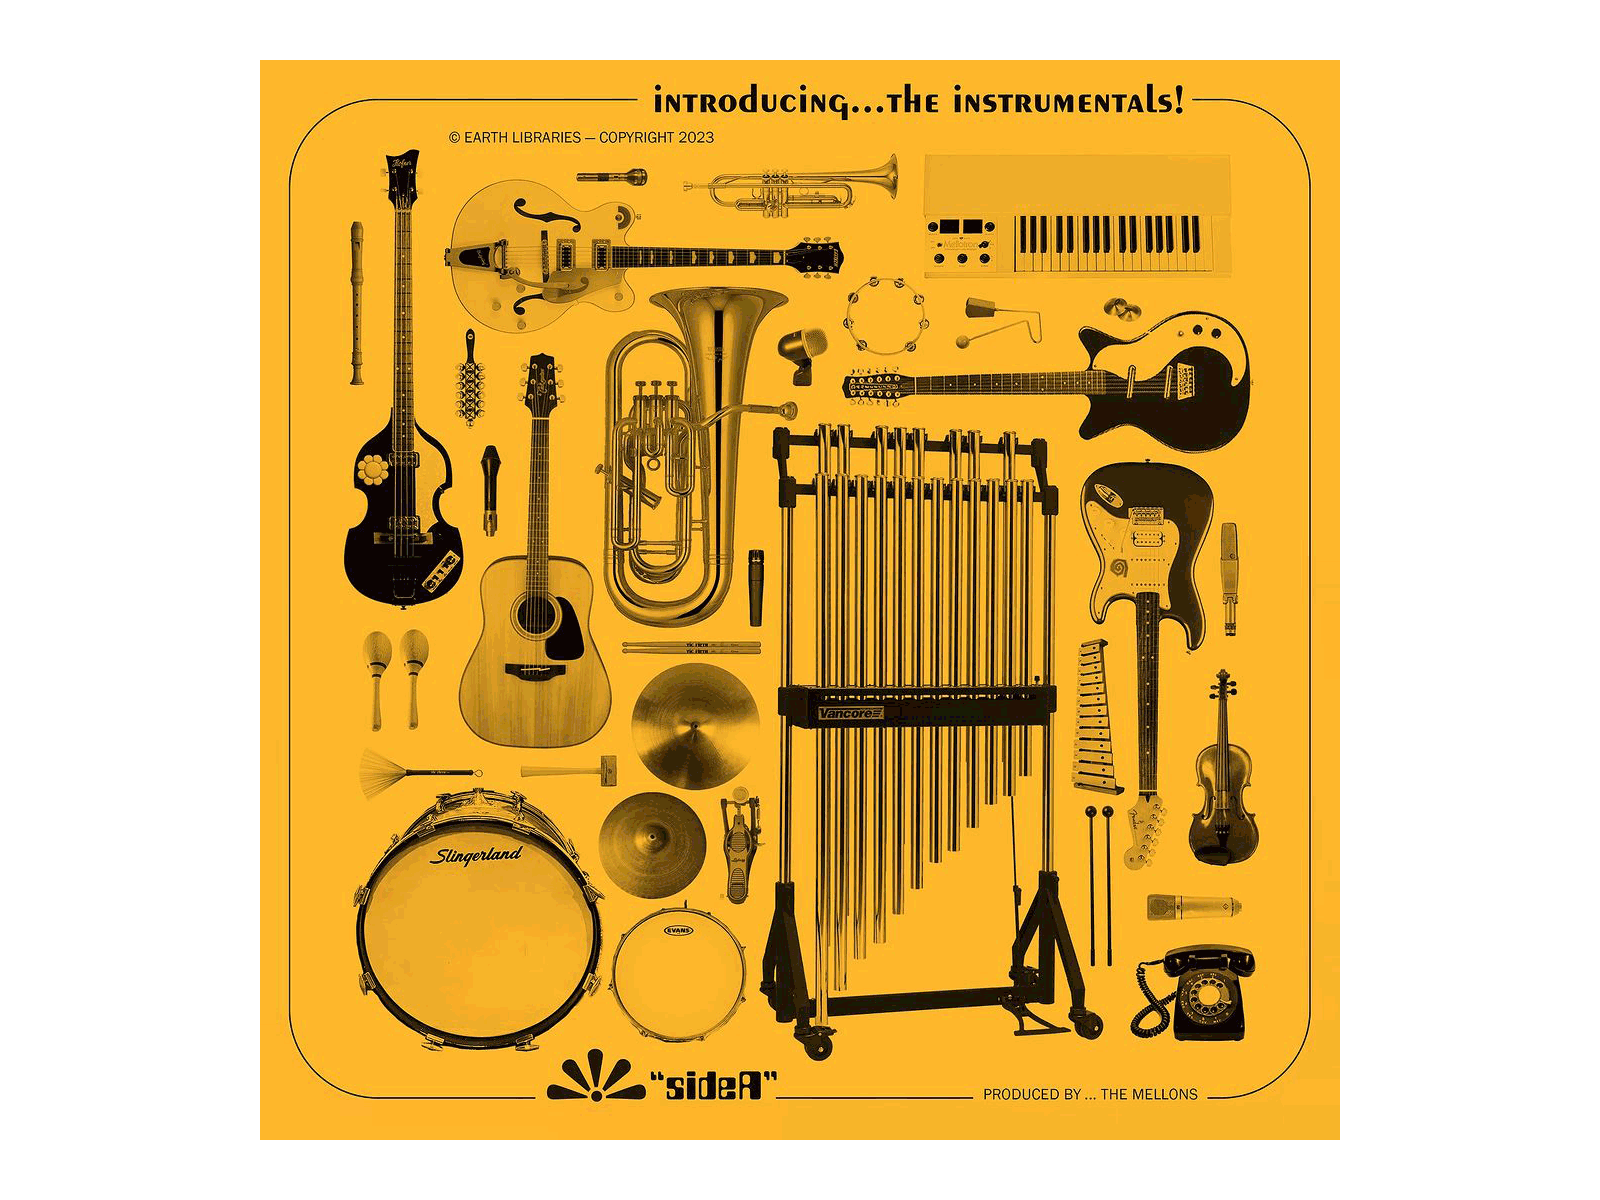 Introducing... the instrumentals! album art baroque pop graphic design instrumental rock and roll the mellons